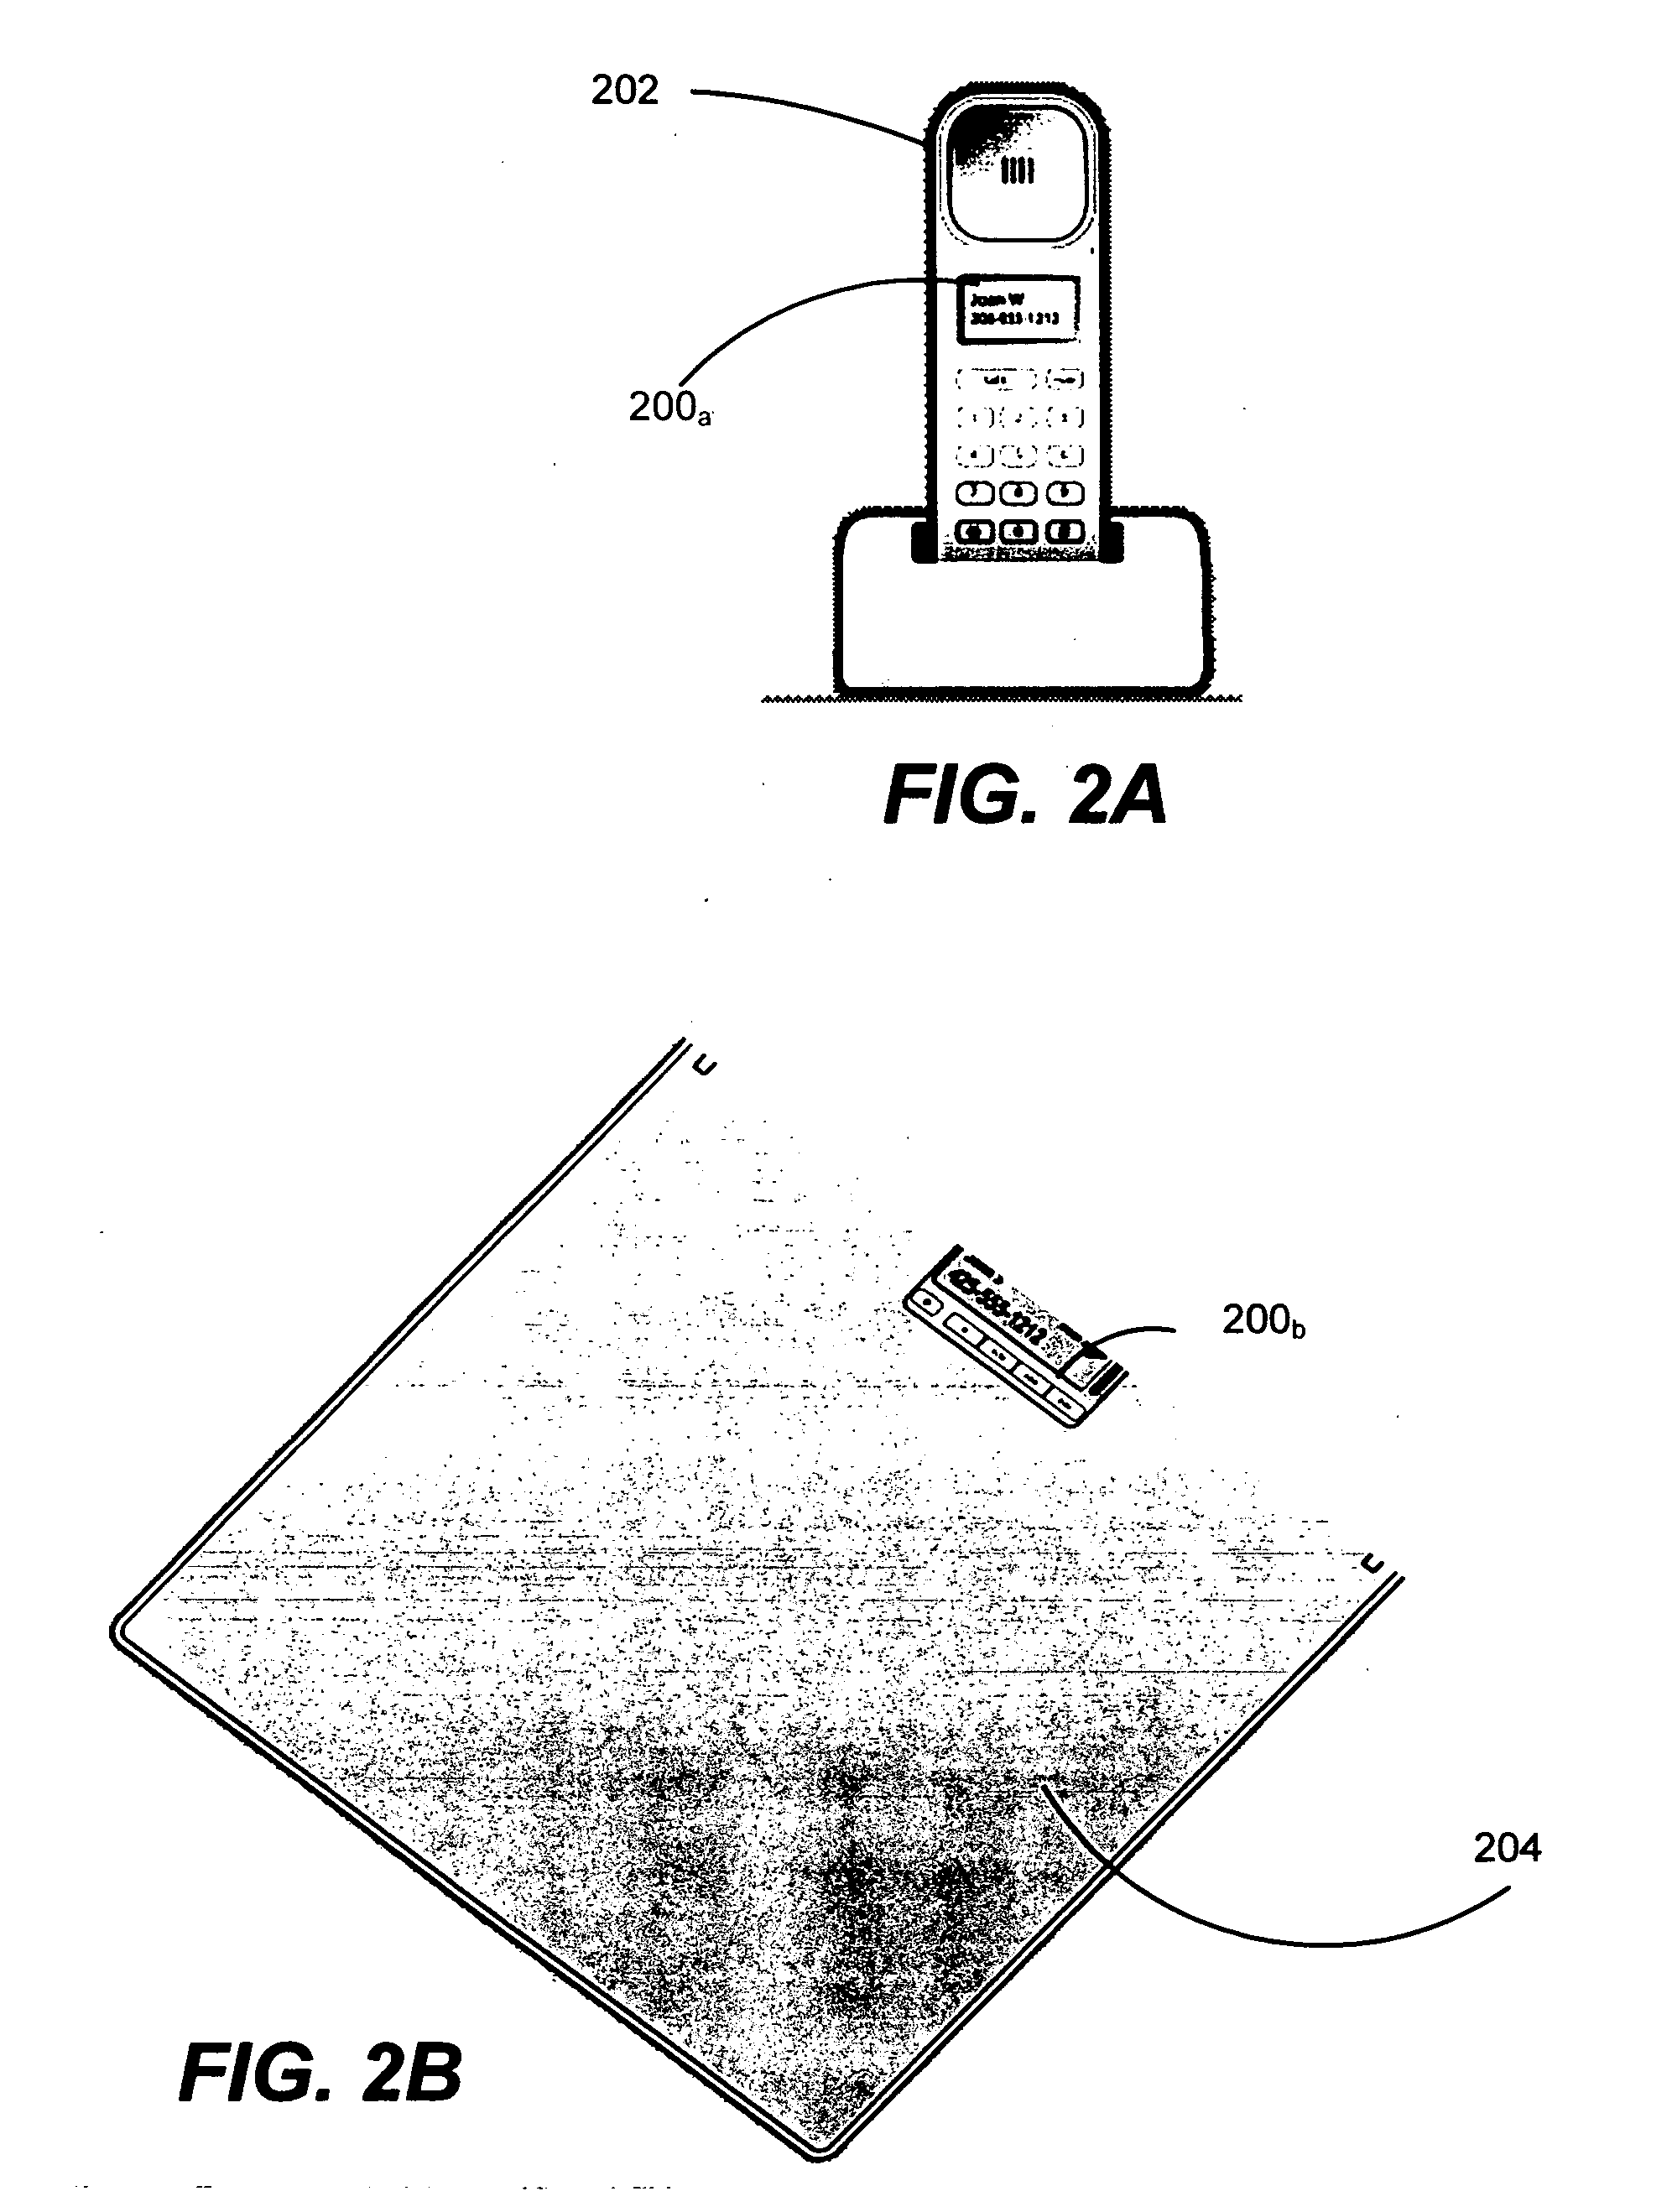 Processing information received at an auxiliary computing device